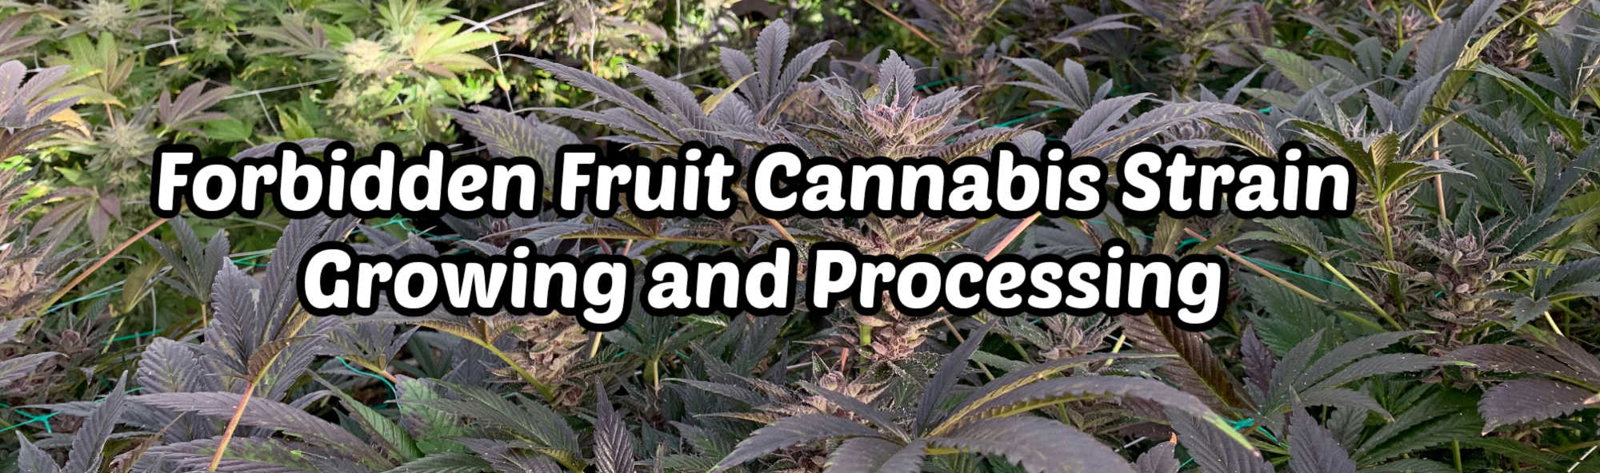 image of forbidden fruit cannabis strain growing and processing